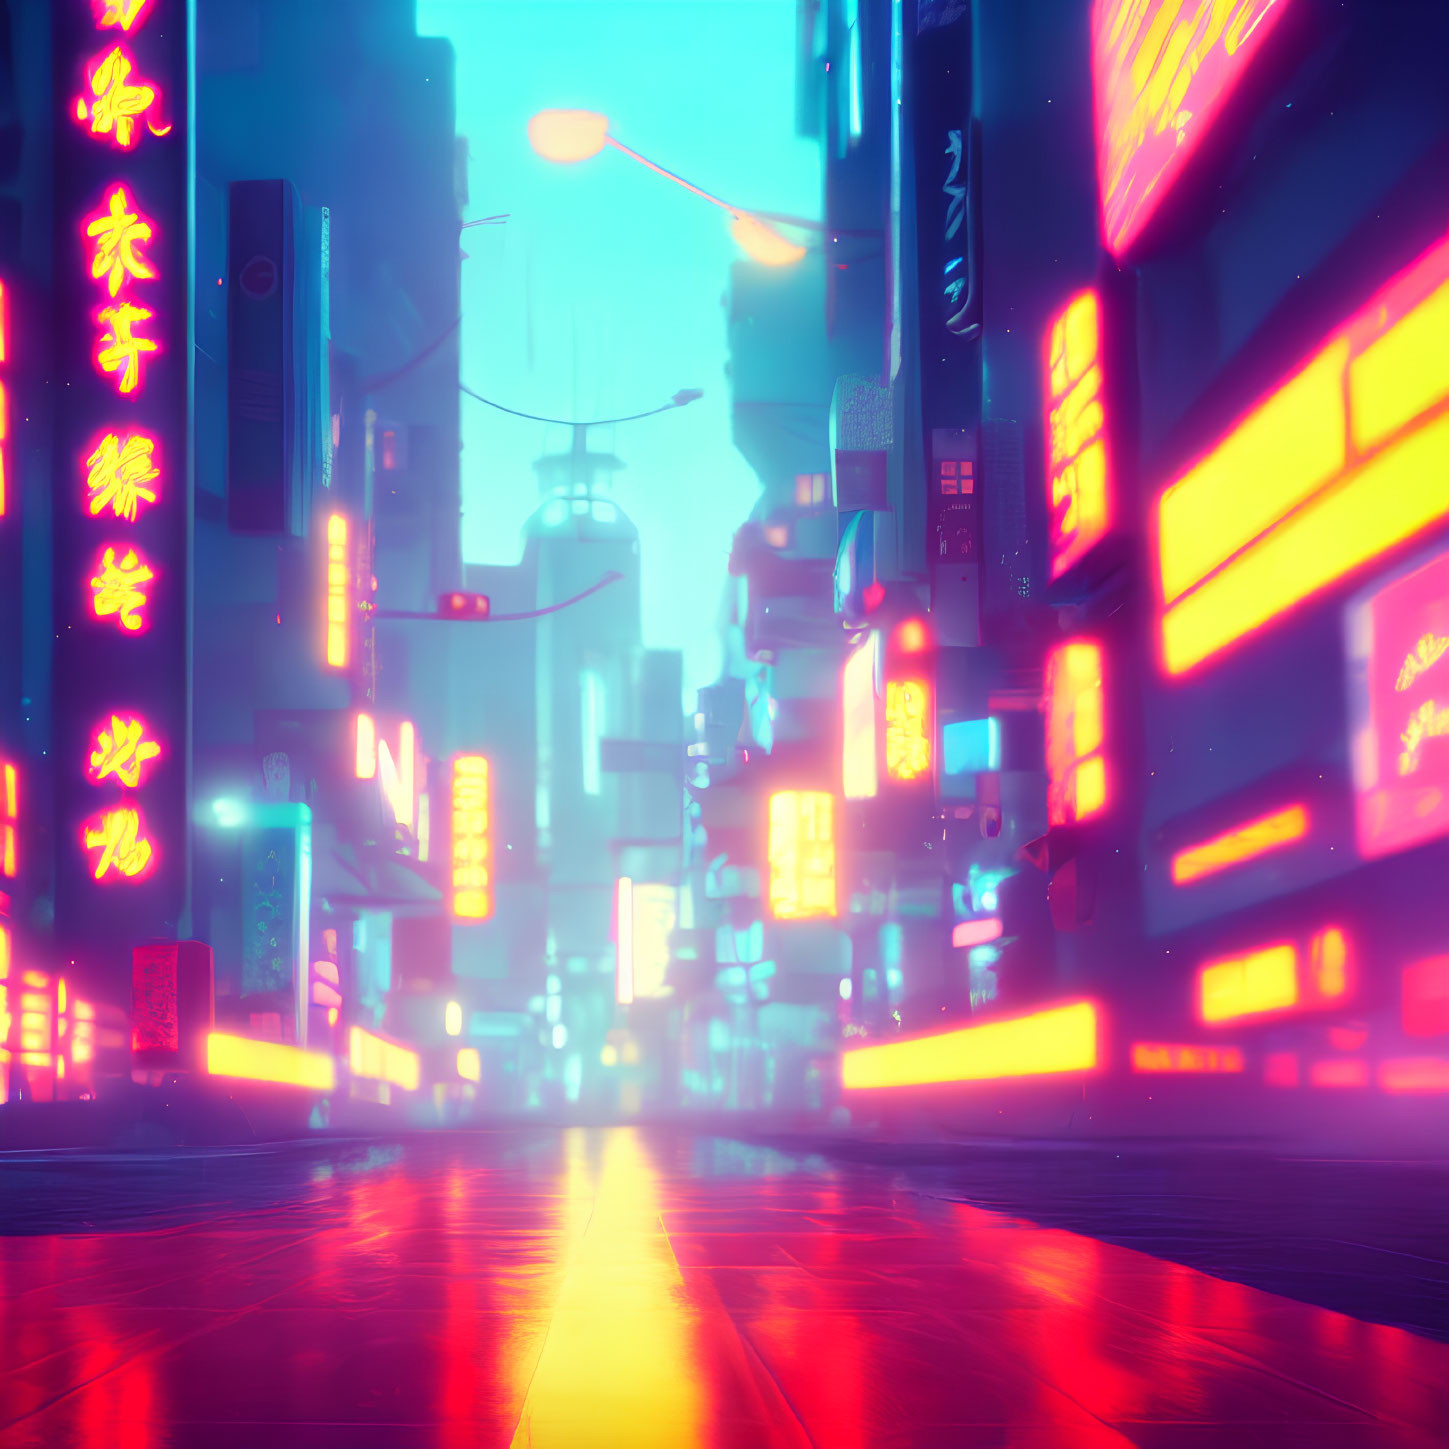 Futuristic city street at twilight with neon-lit signs